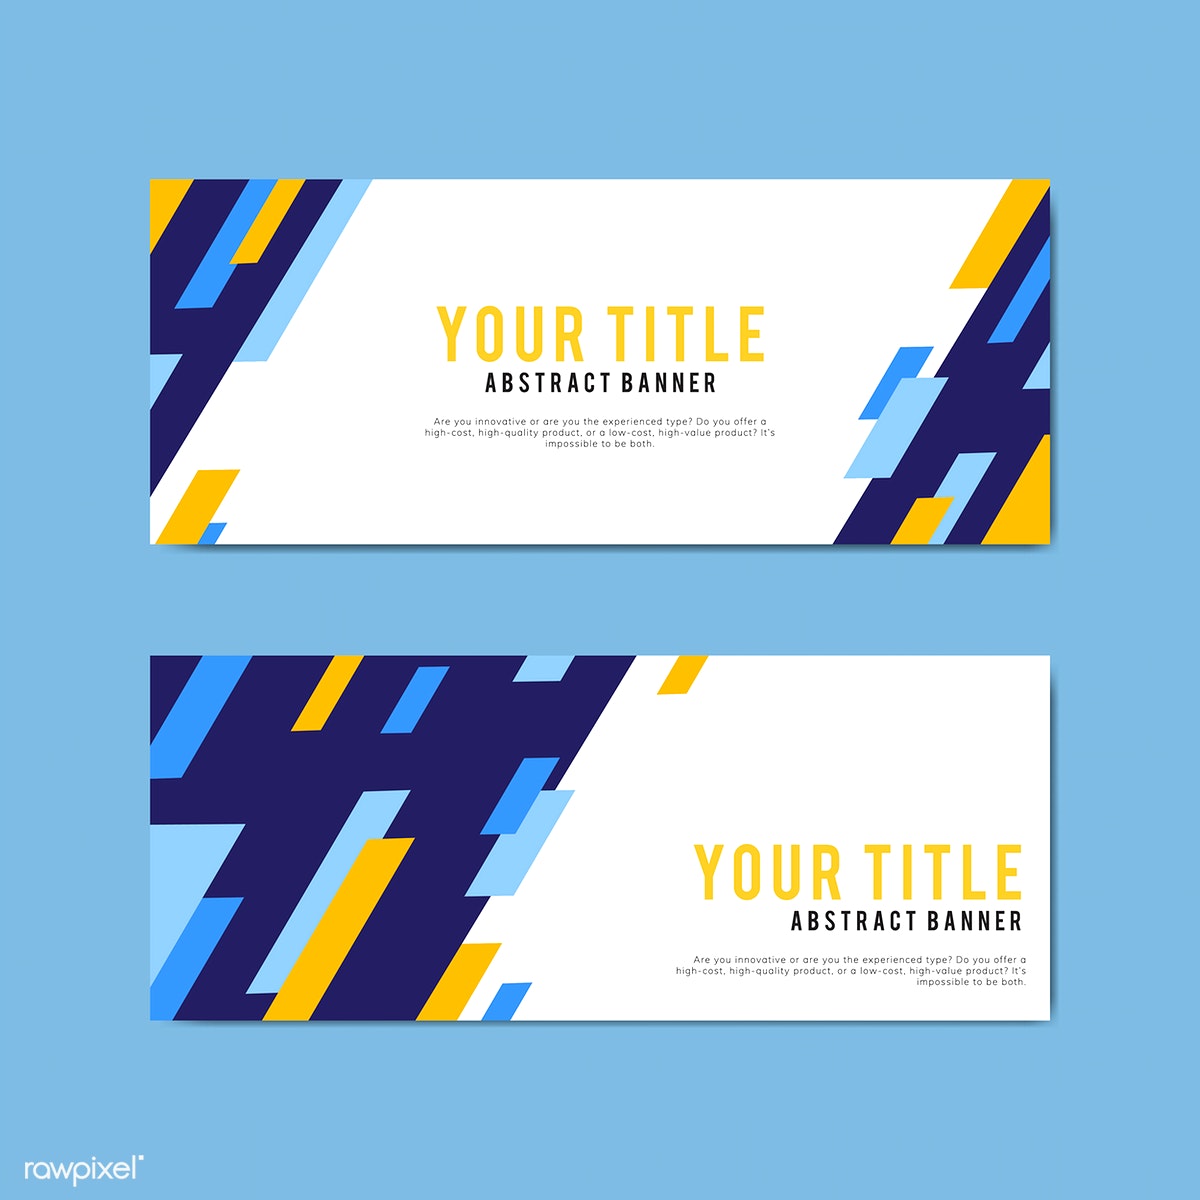 Free banner templates and designs template